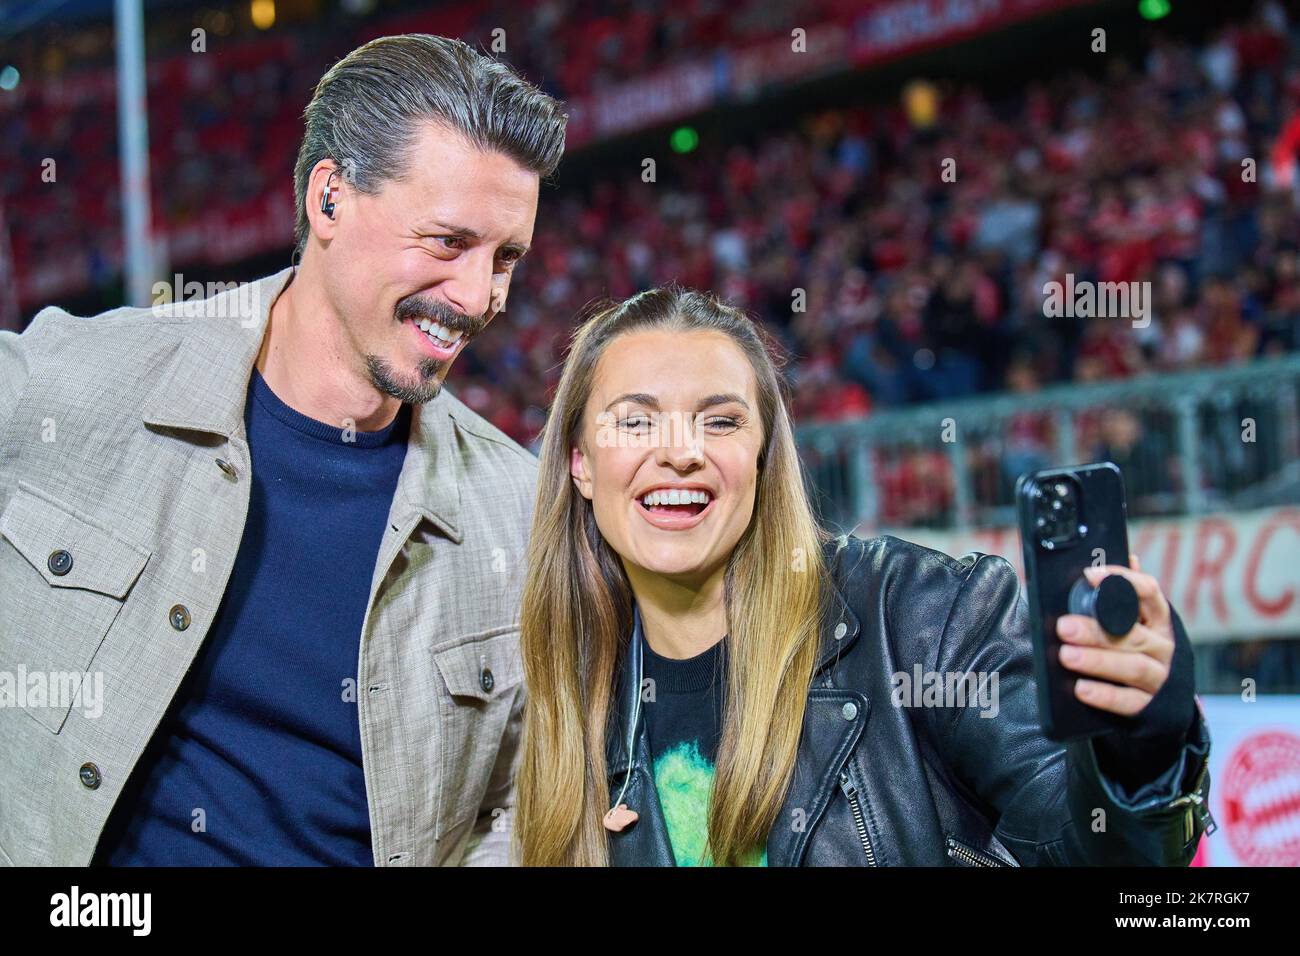 Laura WONTORRA, sports presenter, reporter, woman, moderator, TV, television, Sandro Wagner, Ex-Profi, Sport TV experte,  in the match FC BAYERN MÜNCHEN - SC FREIBURG 5-0  1.German Football League on Oct 16, 2022 in Munich, Germany. Season 2022/2023, matchday 10, 1.Bundesliga, FCB, München, 10.Spieltag © Peter Schatz / Alamy Live News    - DFL REGULATIONS PROHIBIT ANY USE OF PHOTOGRAPHS as IMAGE SEQUENCES and/or QUASI-VIDEO - Stock Photo